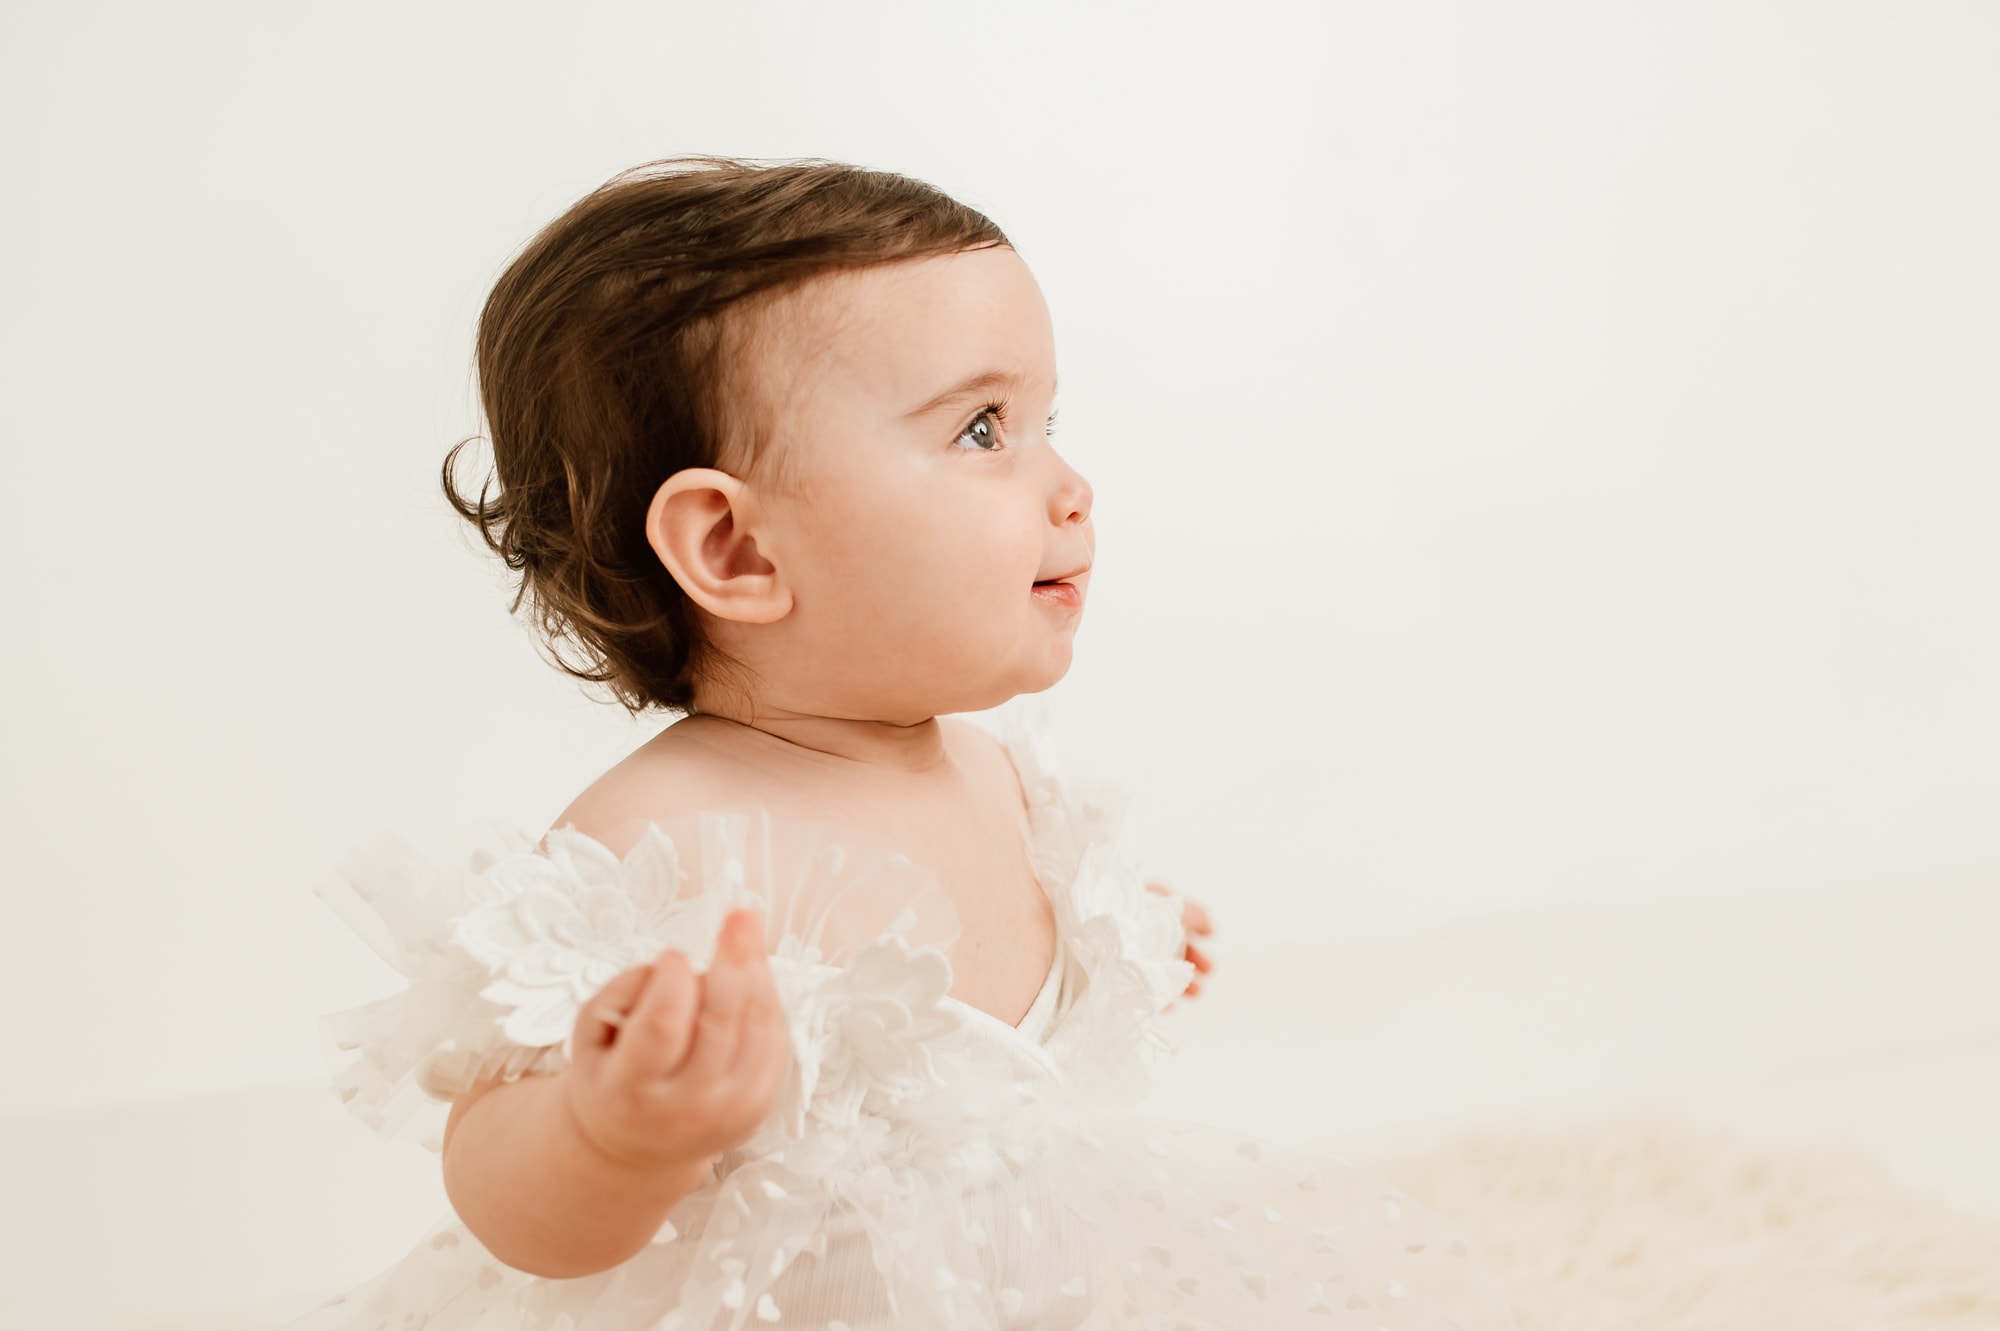 Focus on the lashes of a baby girl during her portrait and cake smash session.